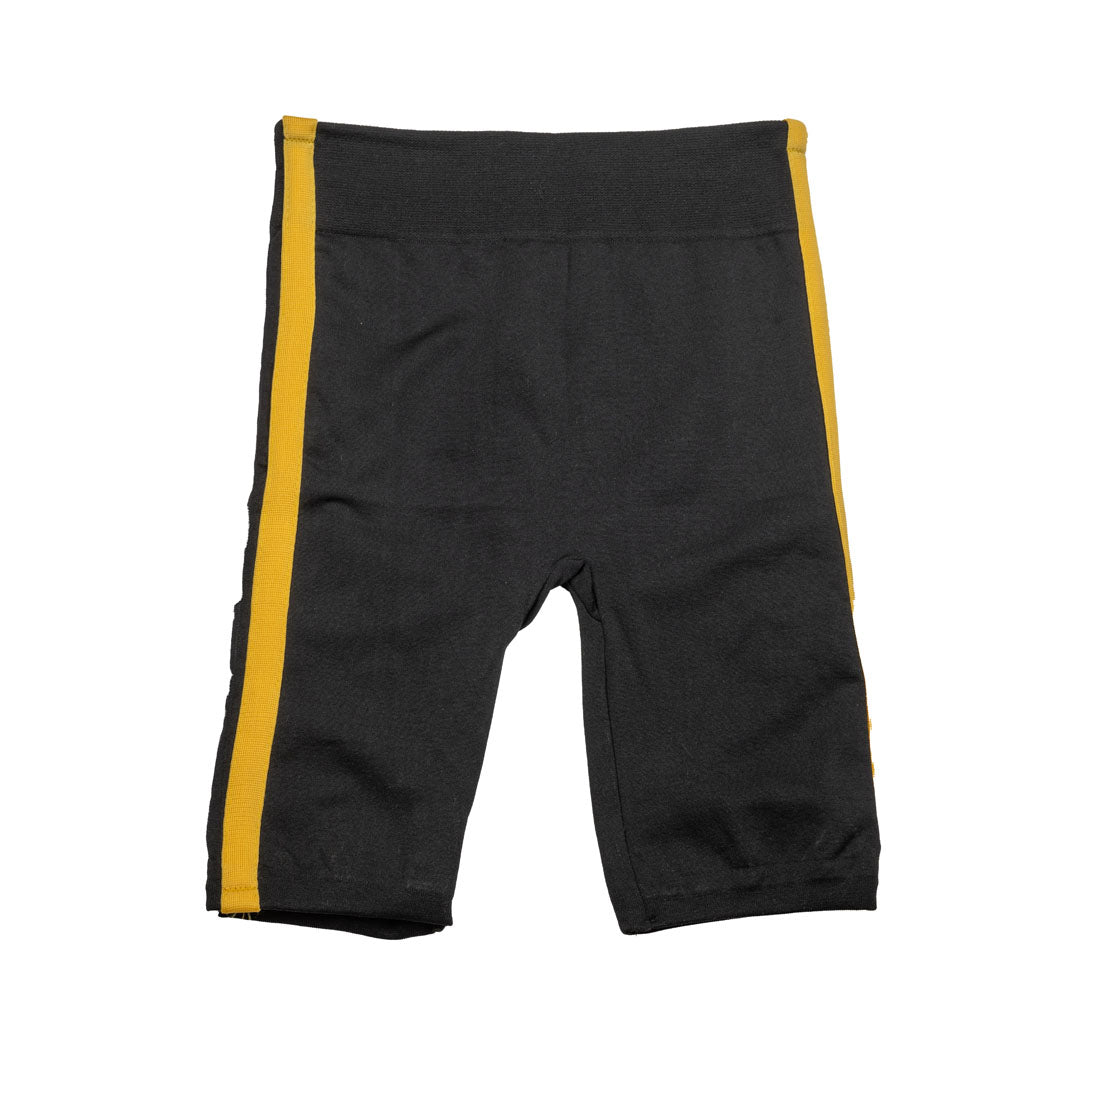 New Look Sports Pants for Girls - mymadstore.com